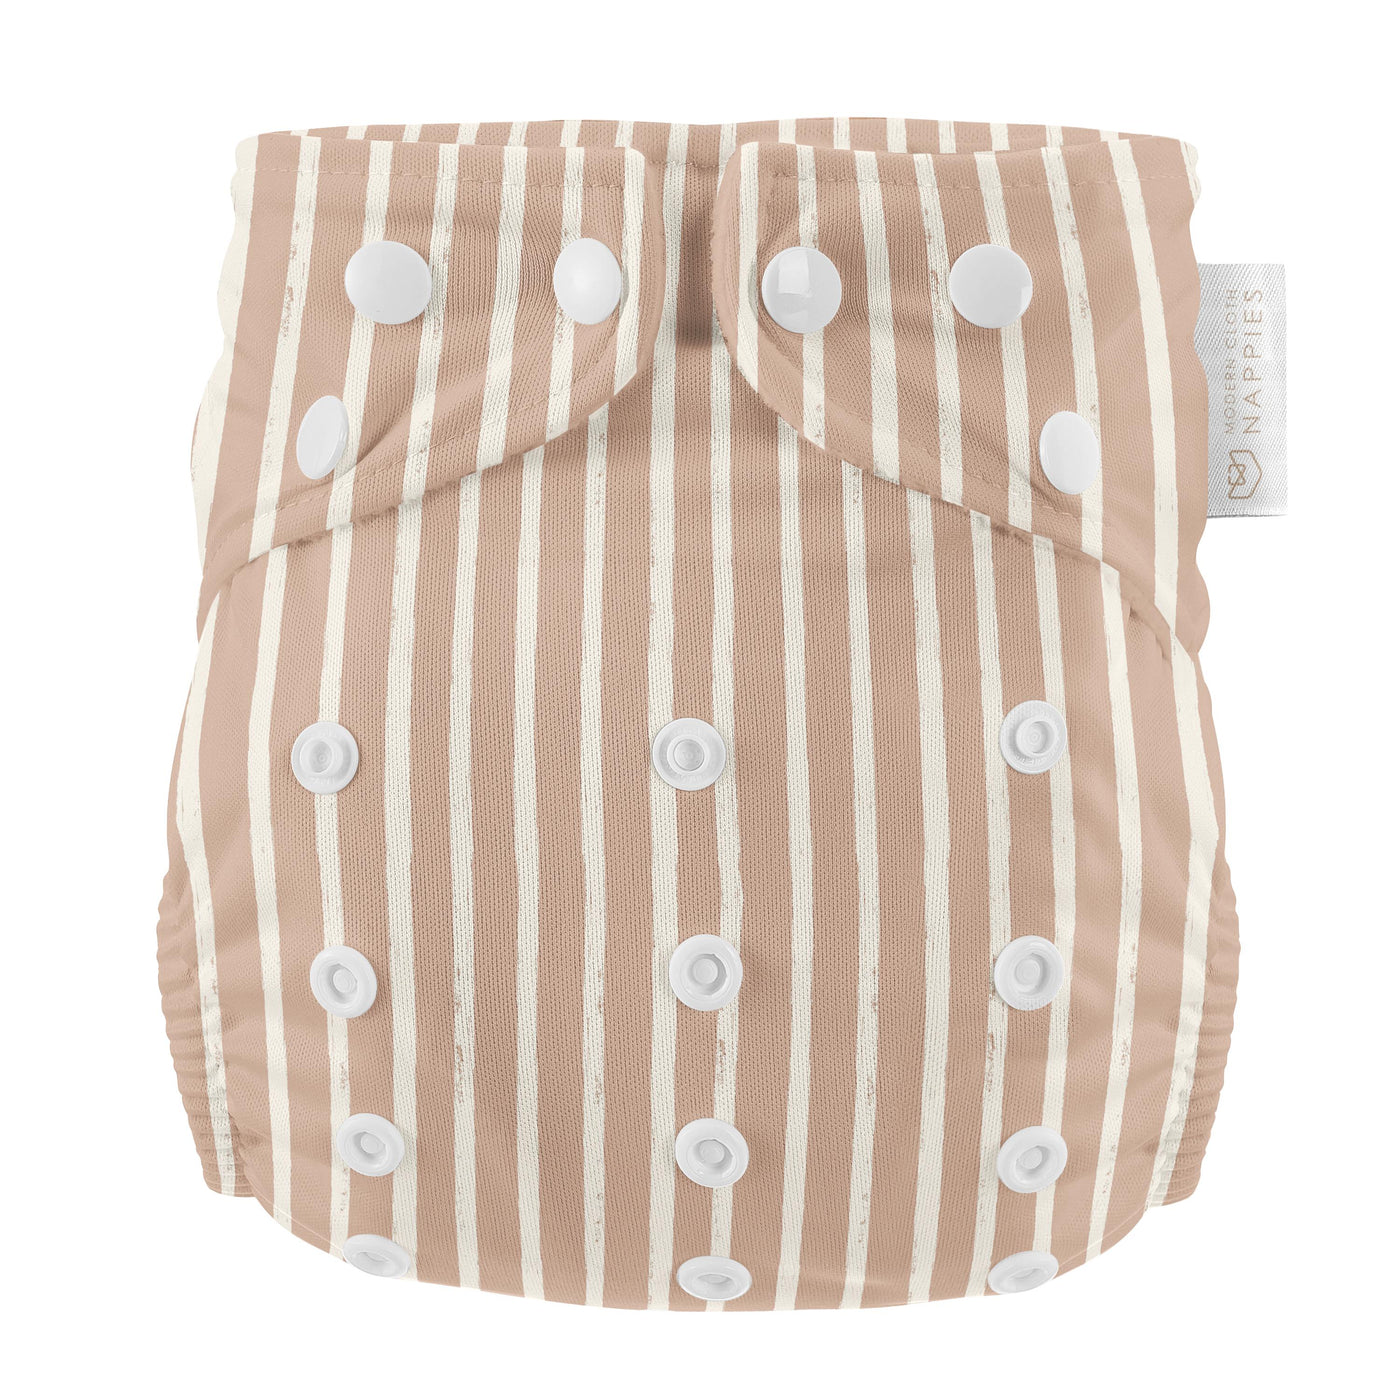 Plus Size Reusable Swim Nappies-Modern Cloth Nappies-Yes Bebe